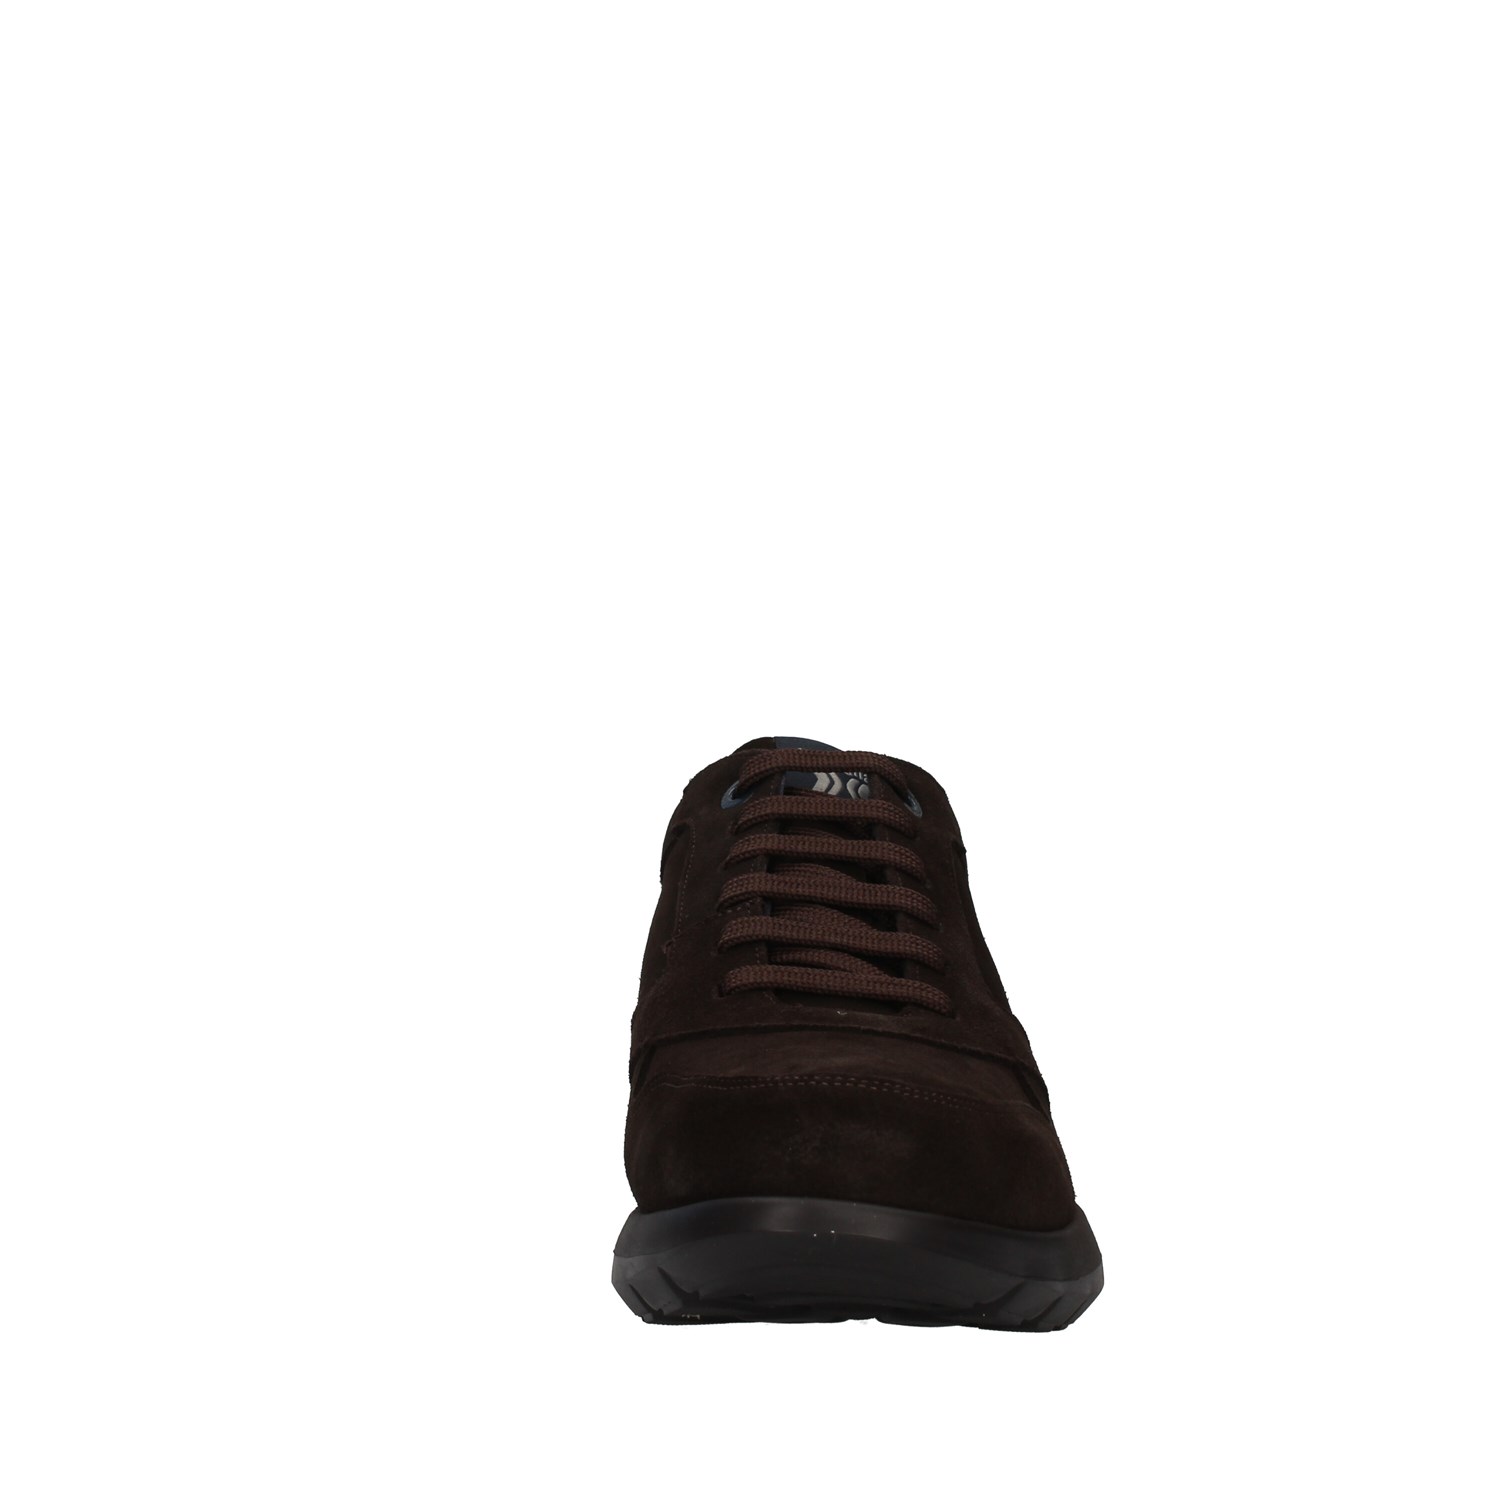 Callaghan Shoes Man low BROWN 42604